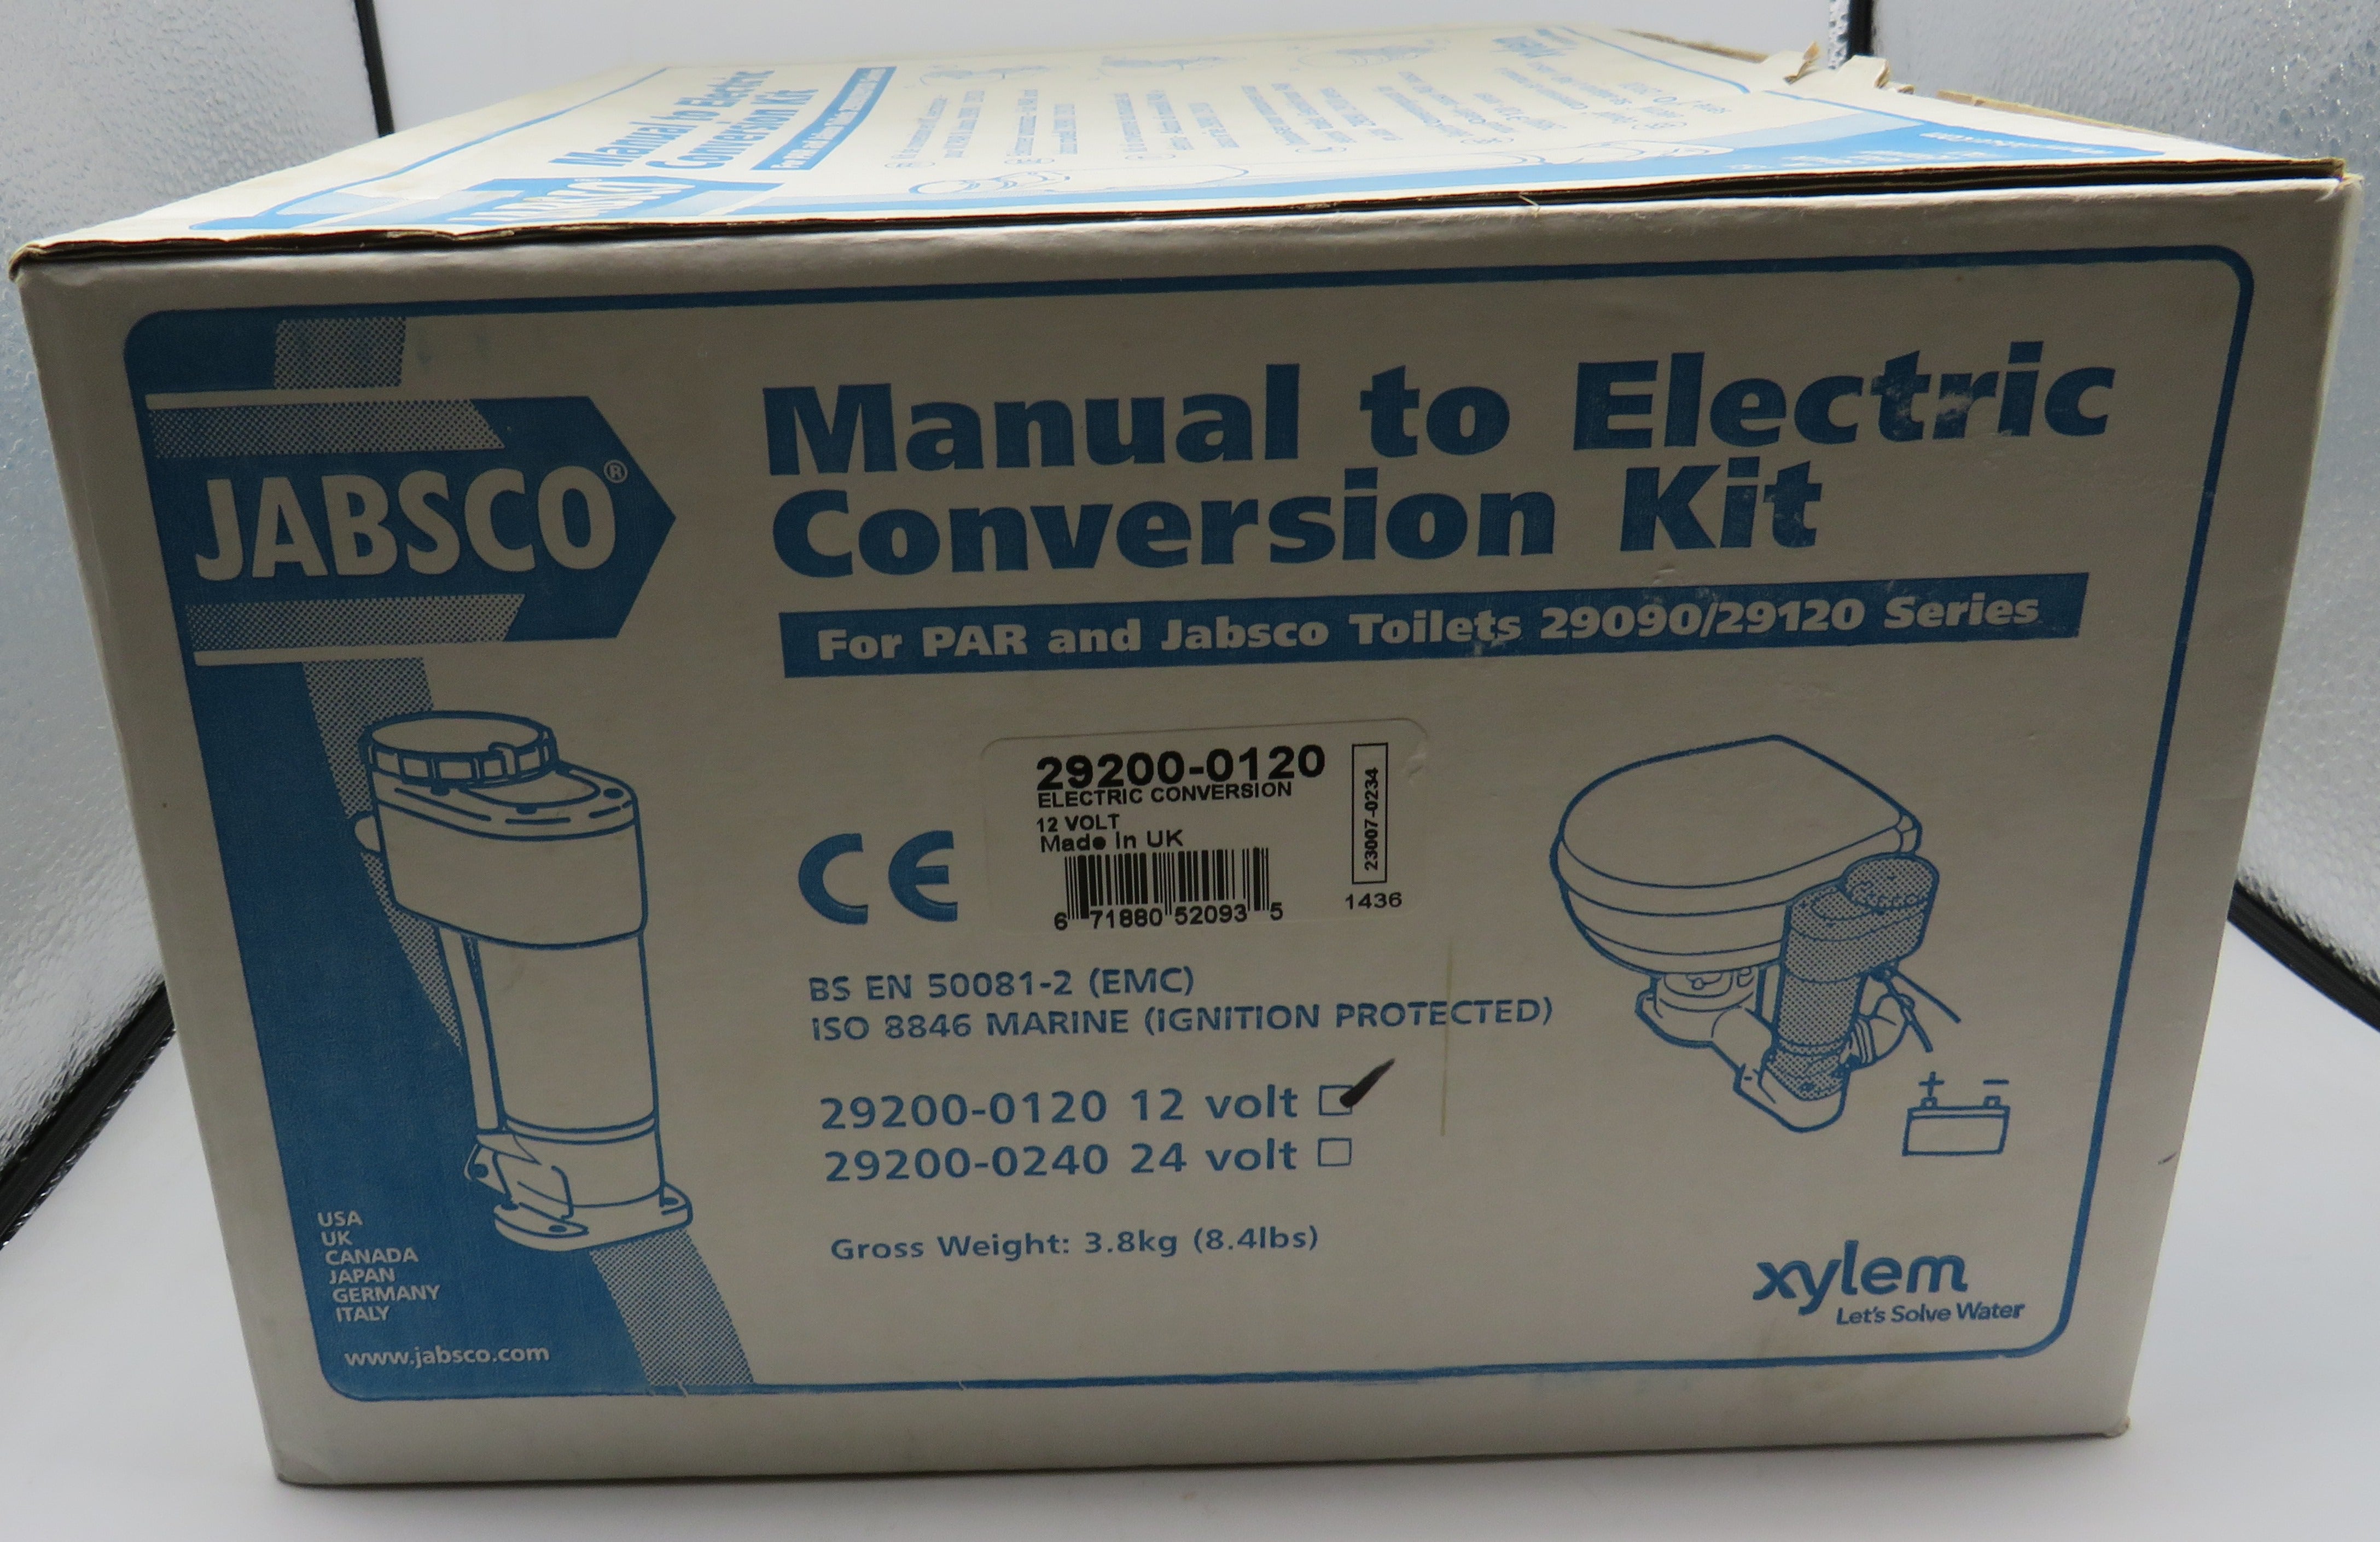 29200-0120 Jabsco Manual to Electric Conversion Kit 12 Volt for Par and Jabsco Toilets 29090/29120 Series